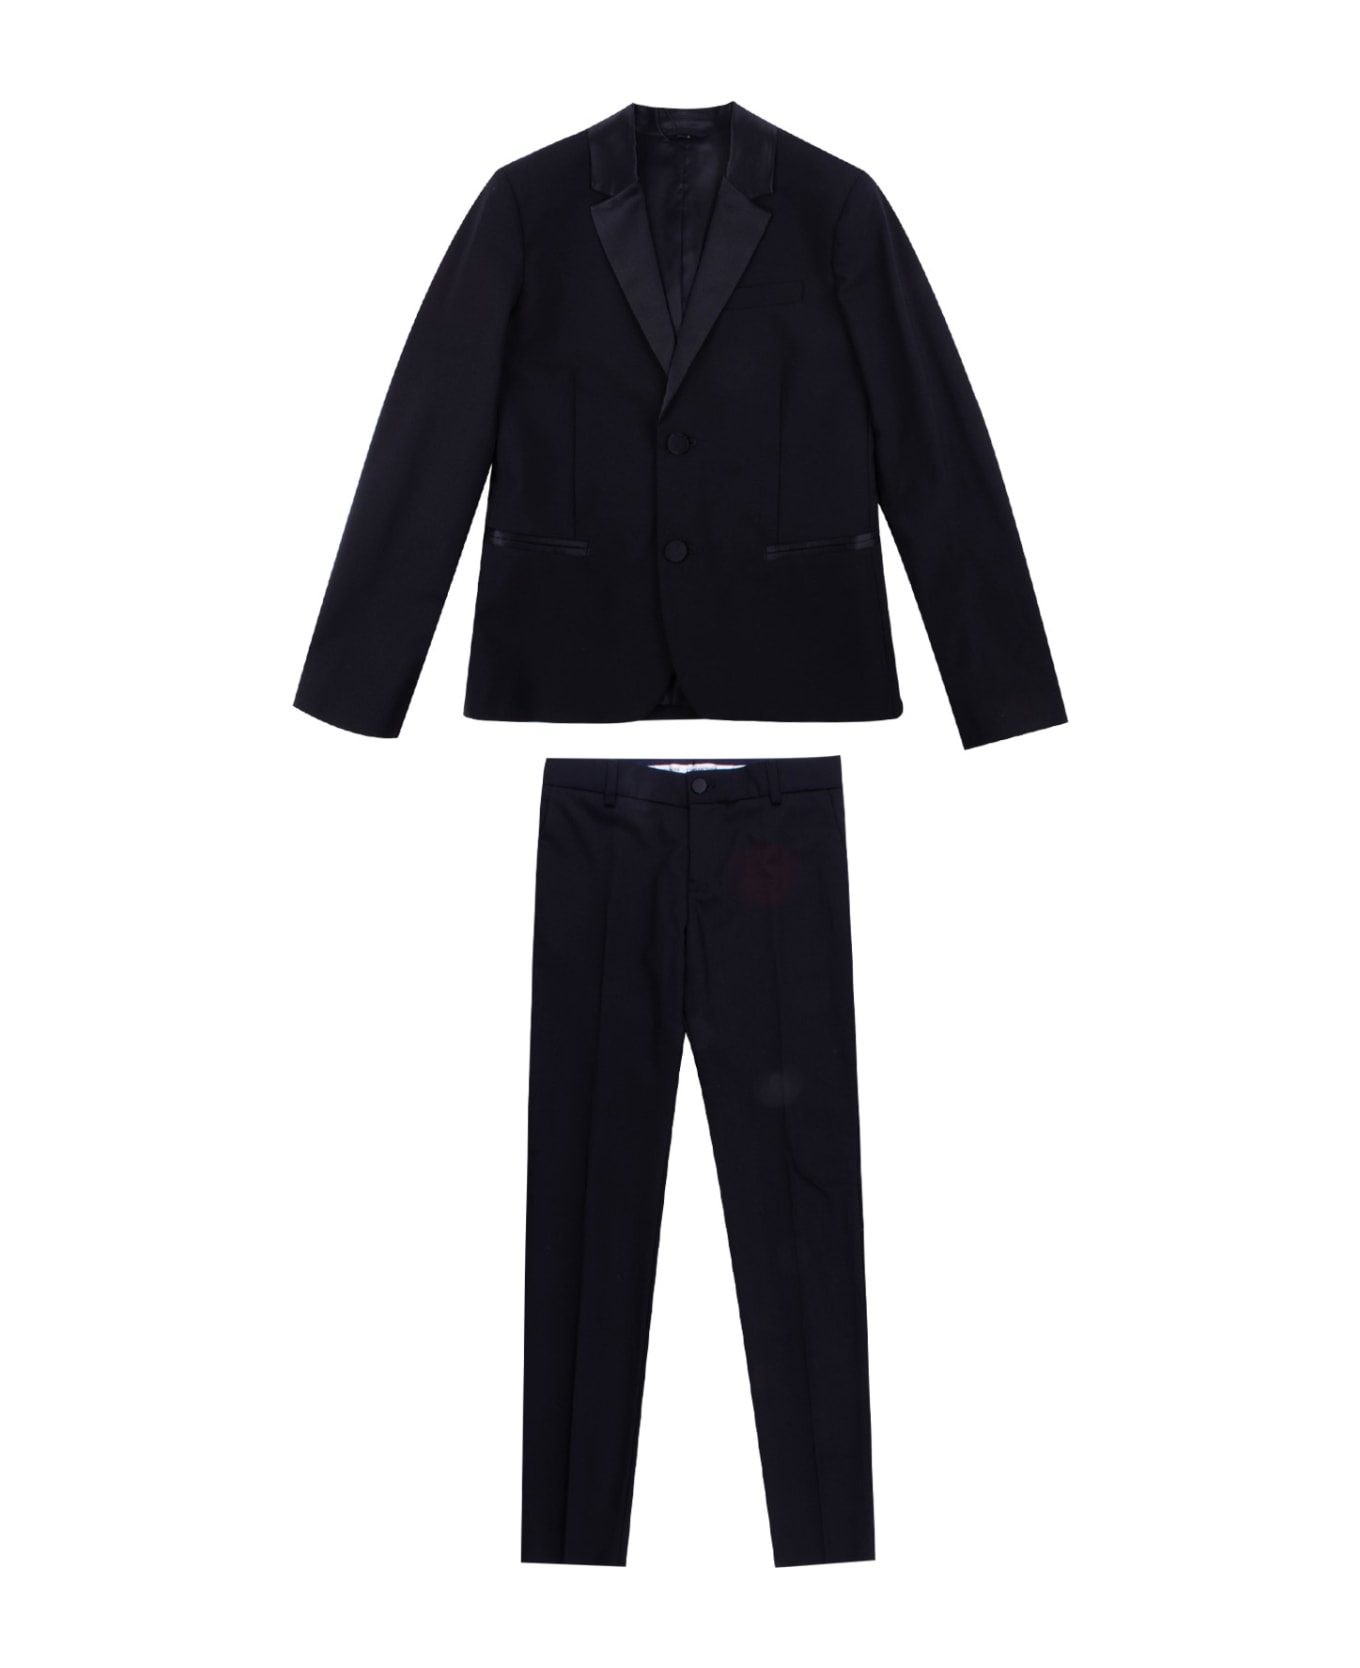 Emporio Armani Wool Blend Jacket And Pants - Back